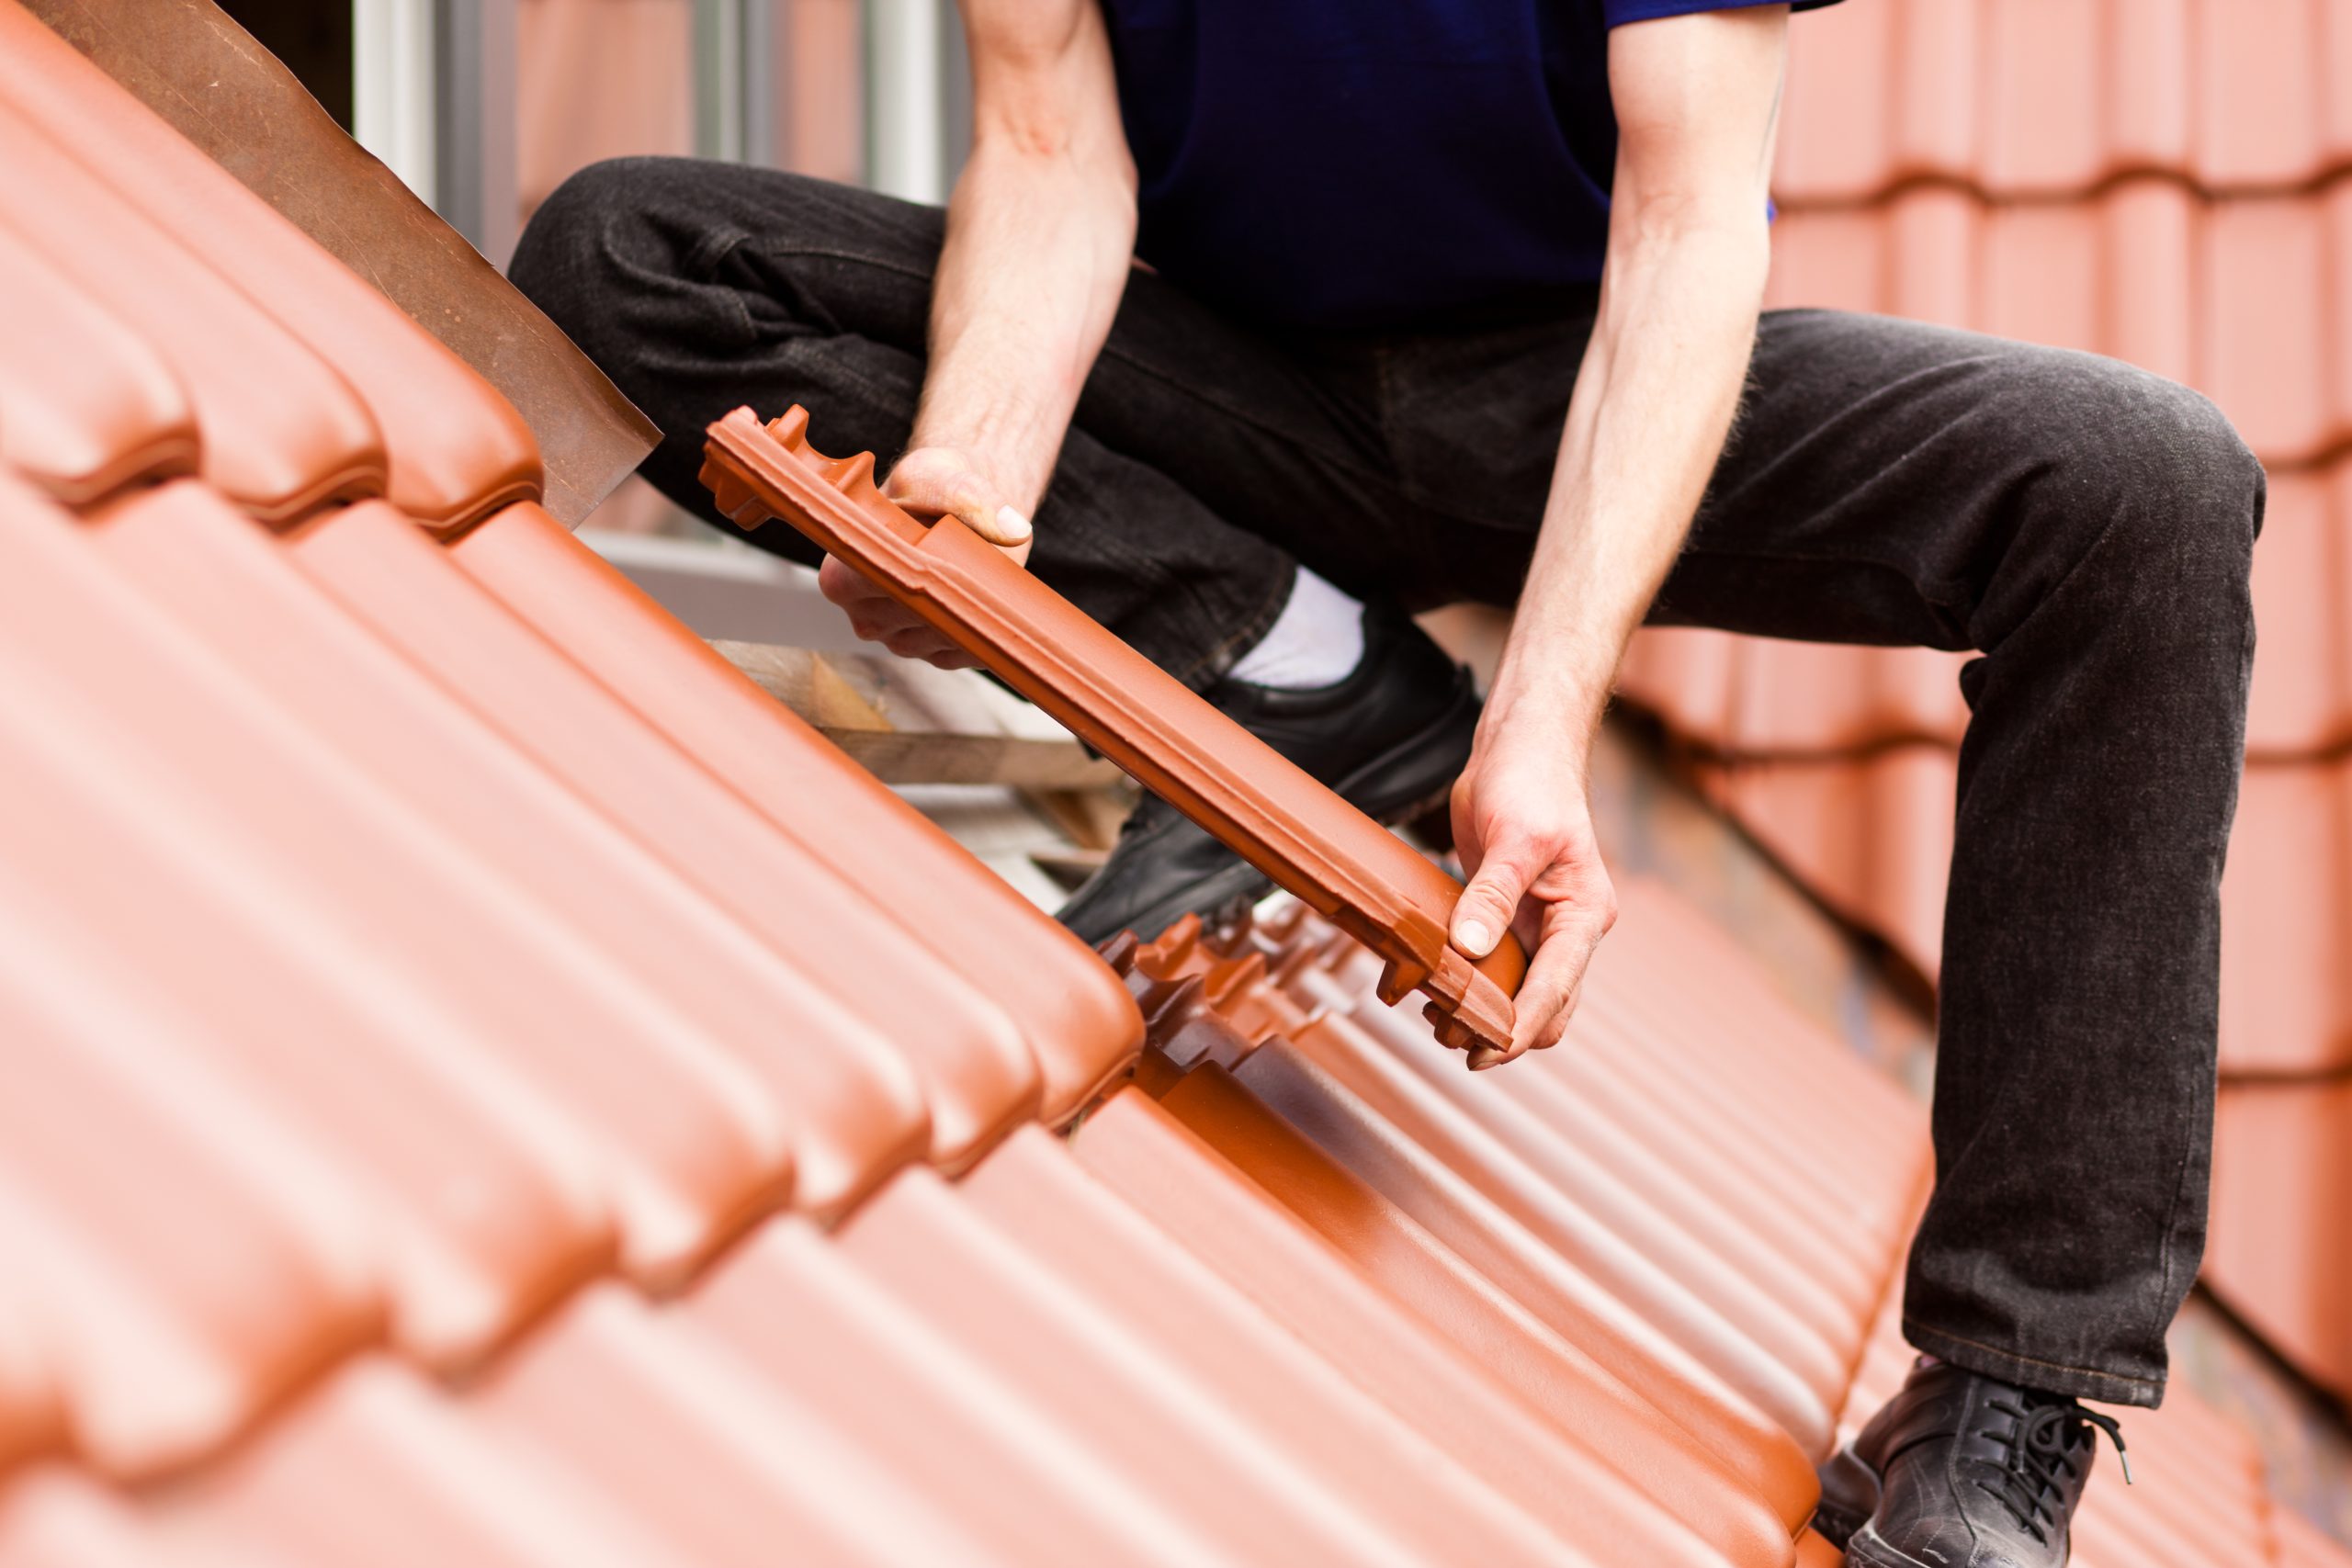 Roofing - construction worker standing on a roof covering it with tiles